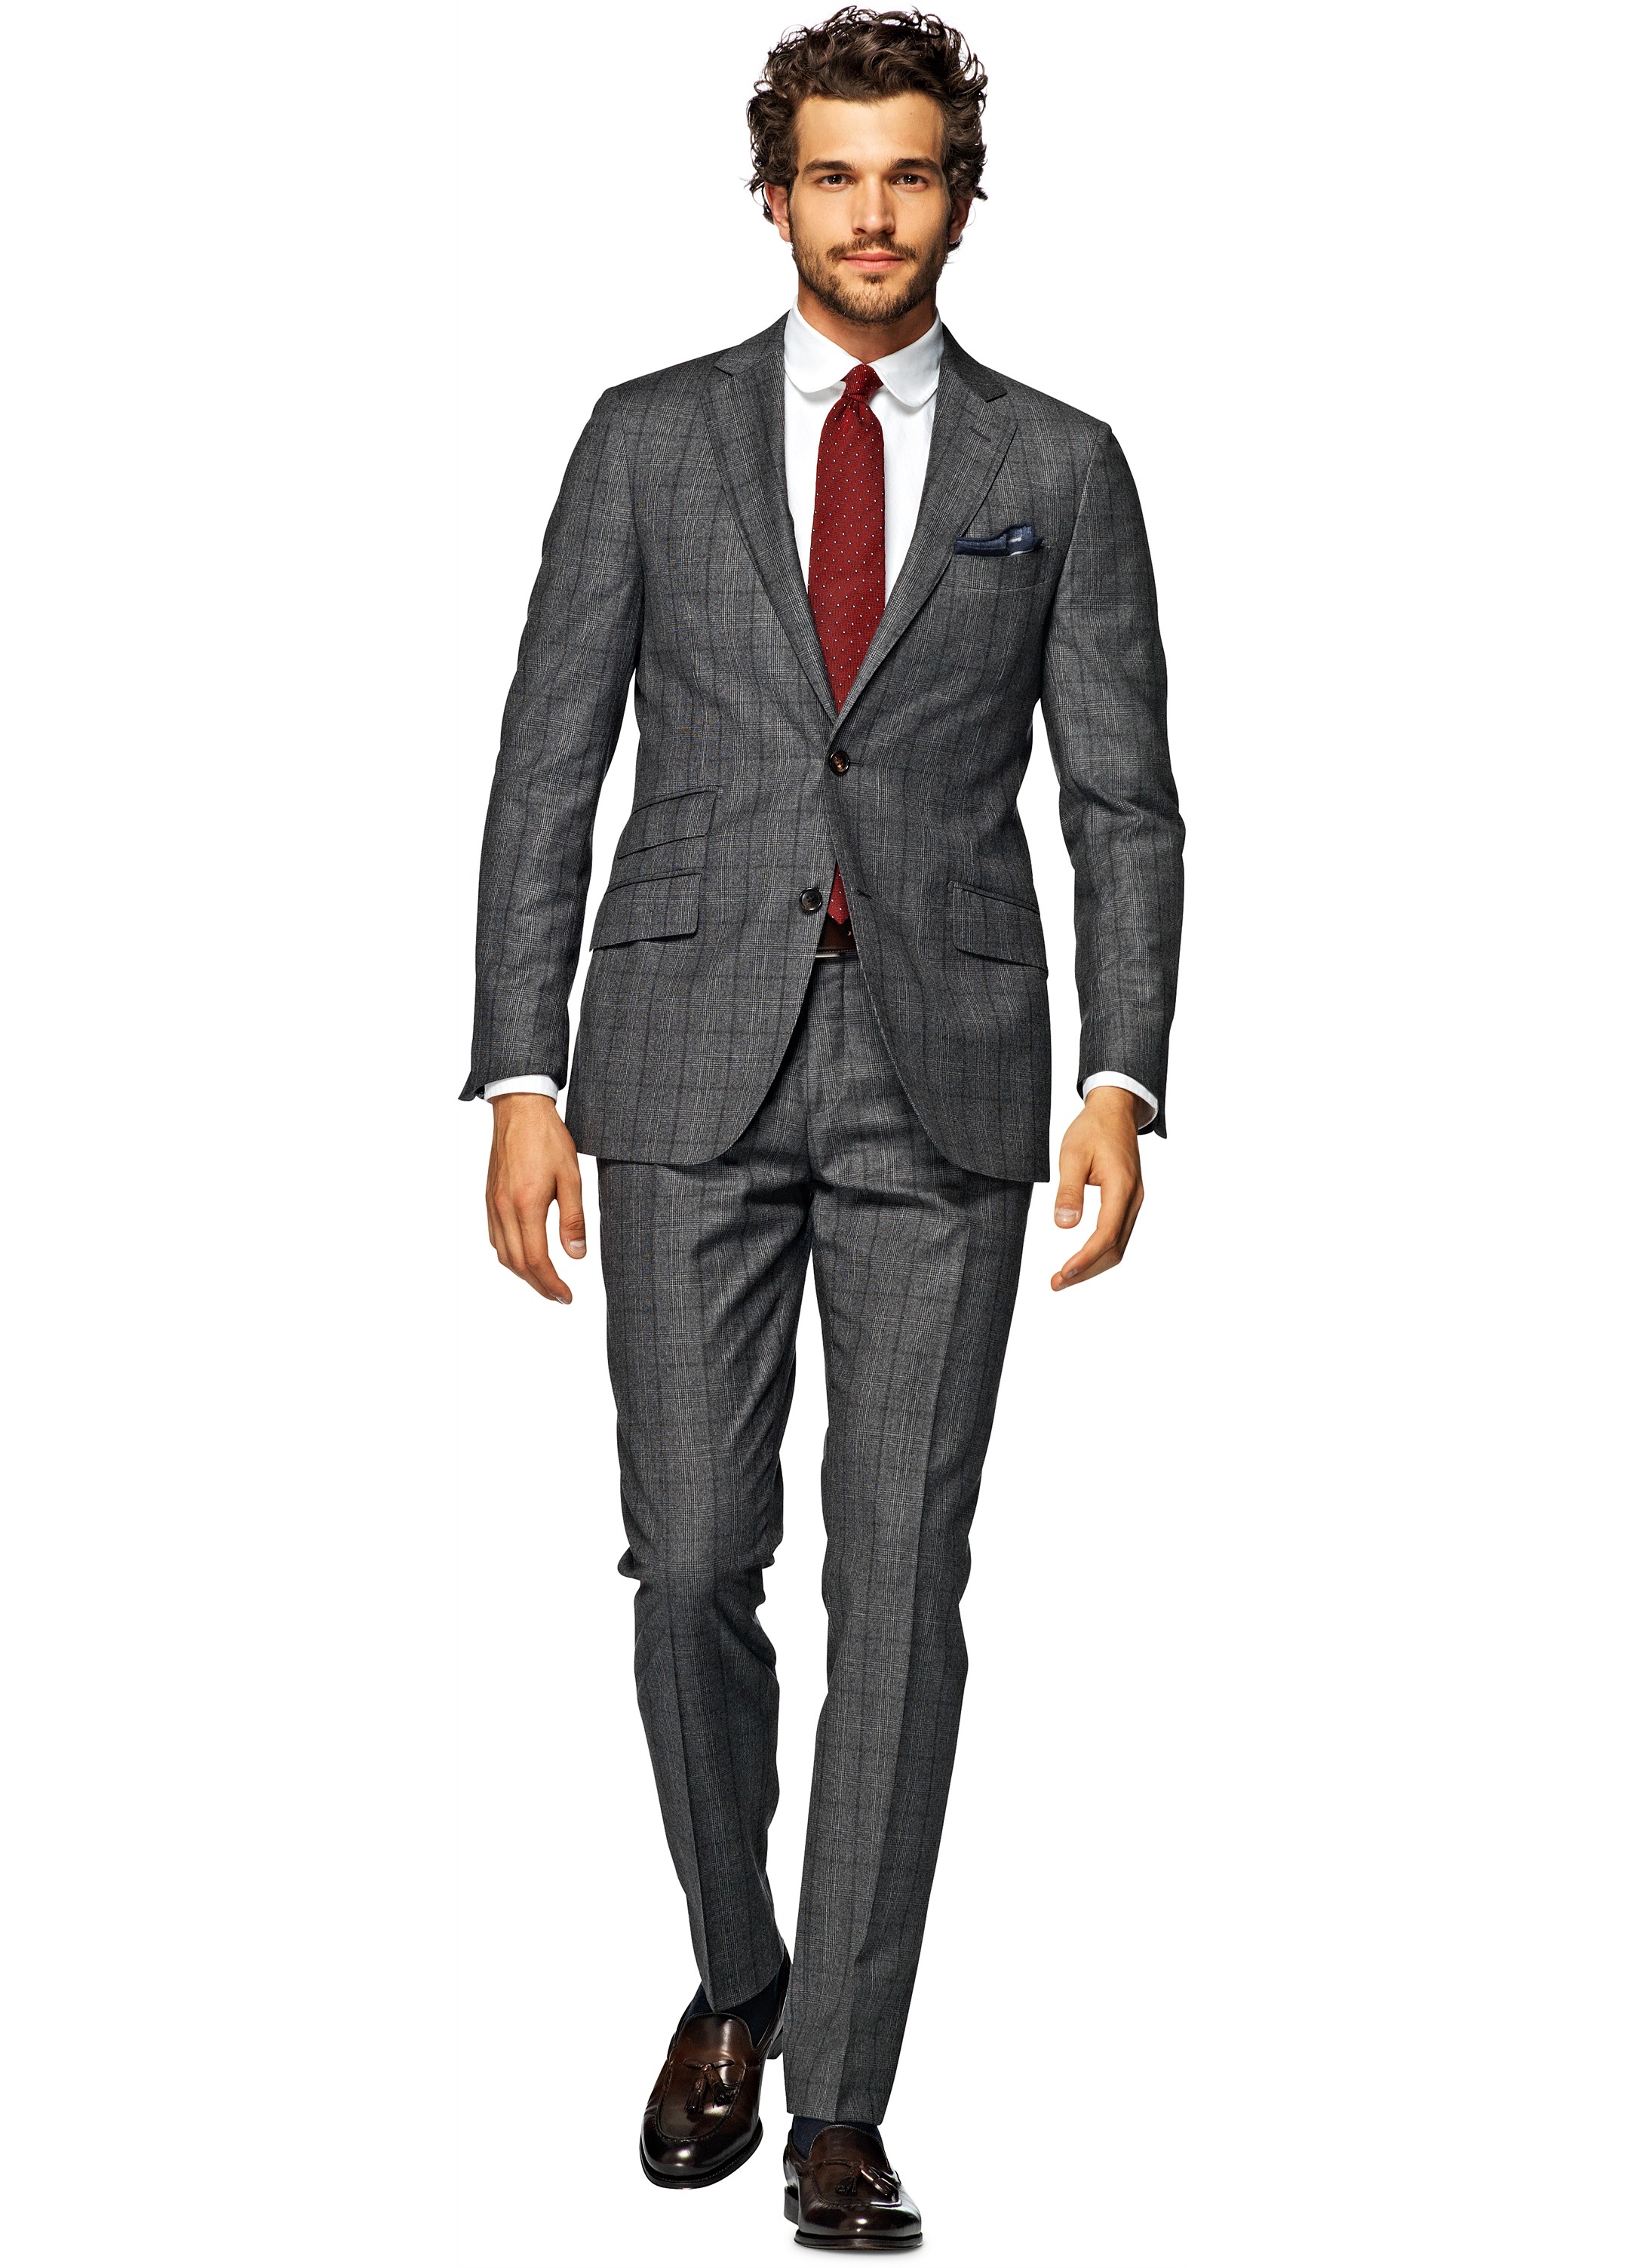 Suit Grey Check Sienna P3930i | Suitsupply Online Store